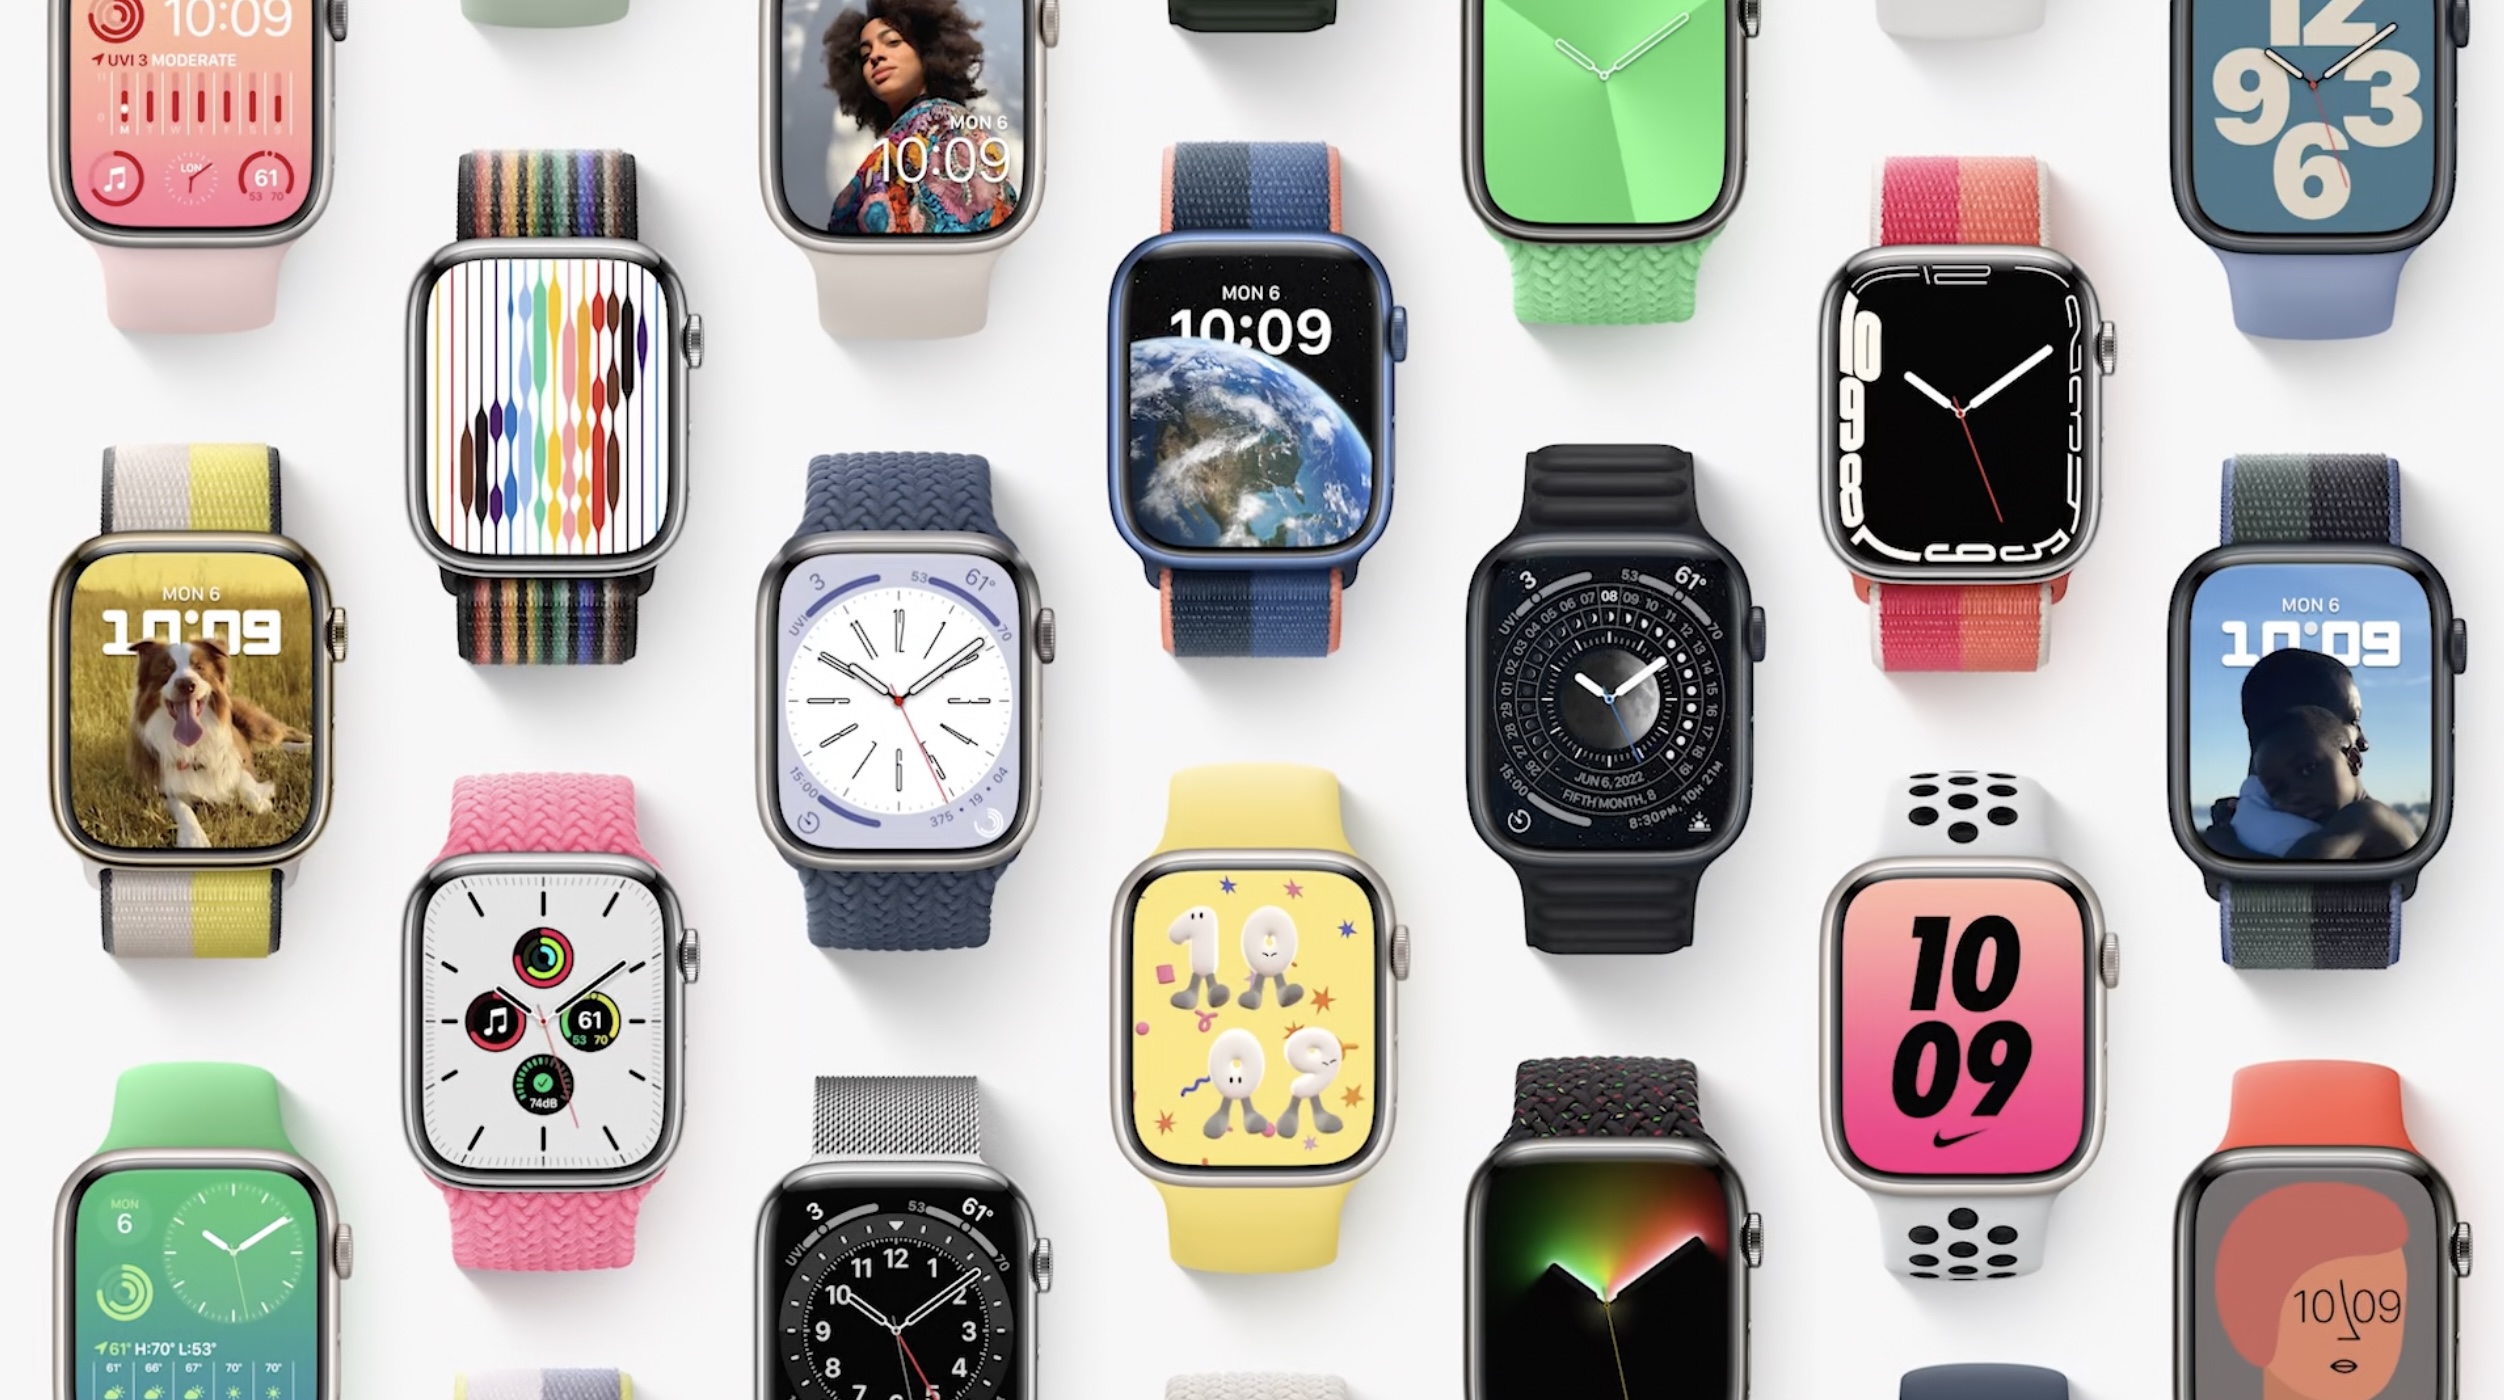 Apple Watch Series 7 Is Now $100 Off on